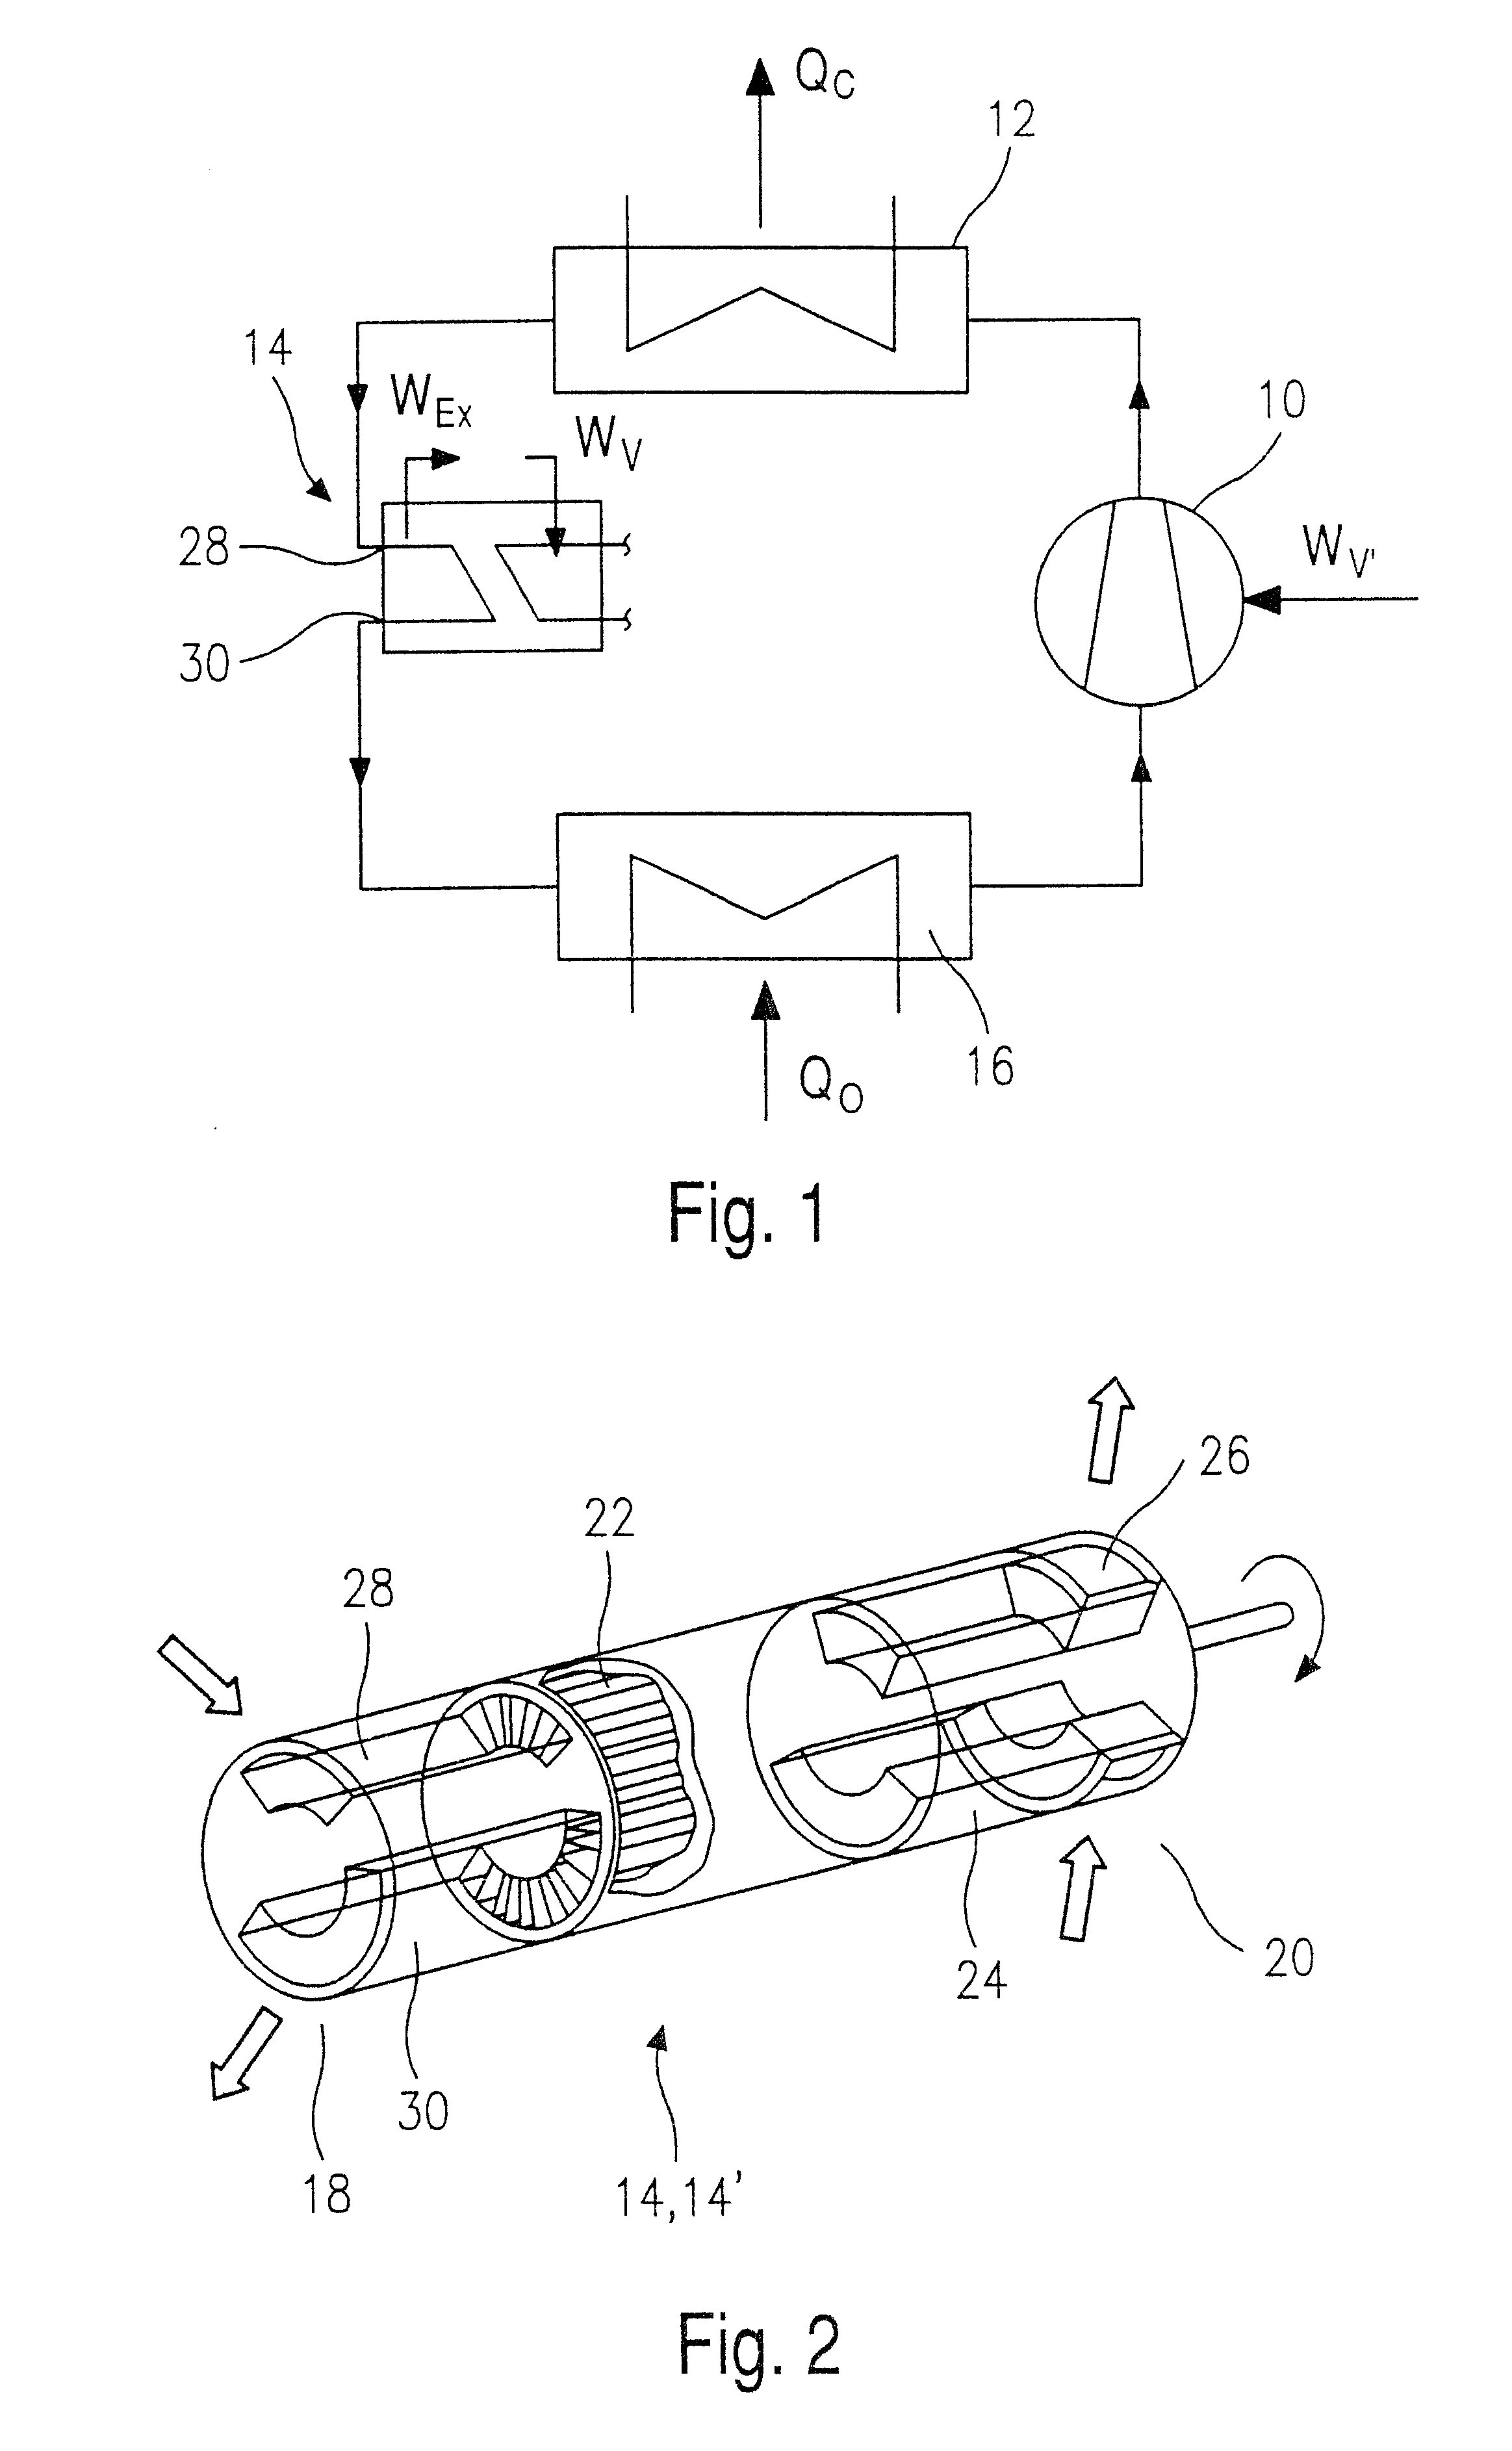 Motor vehicle air-conditioning system and a method for operating a motor vehicle air conditioning system